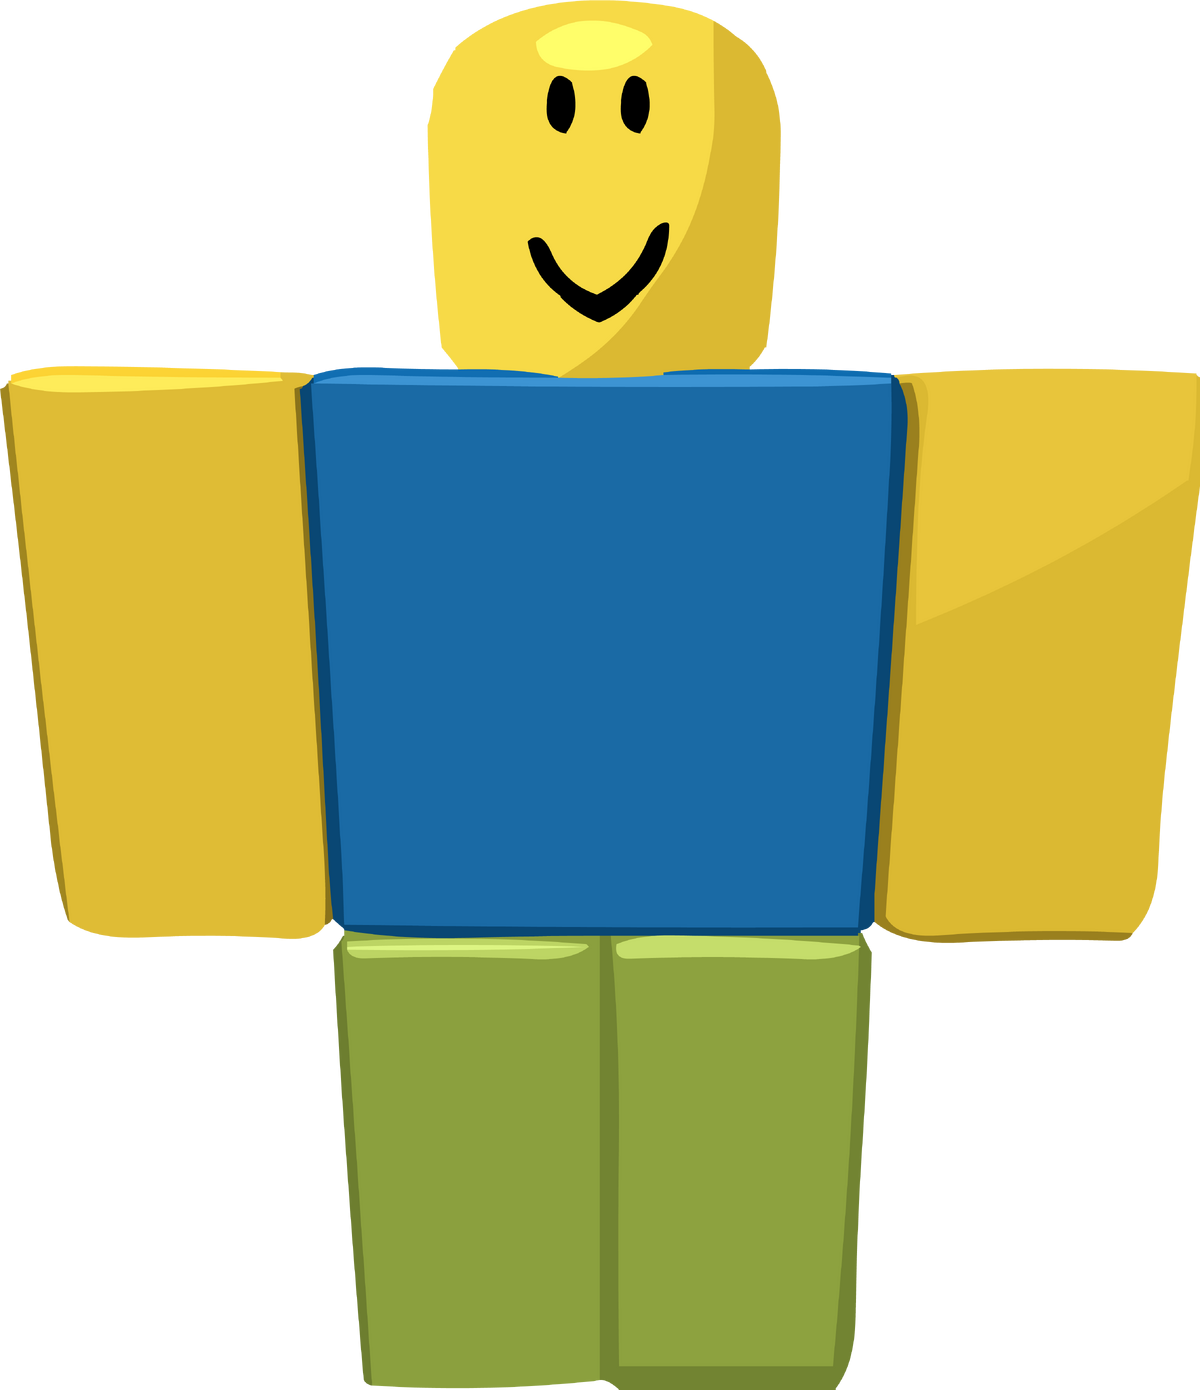 Open full size Noob - Roblox Noob. Download transparent PNG image and share  SeekPNG with friends!